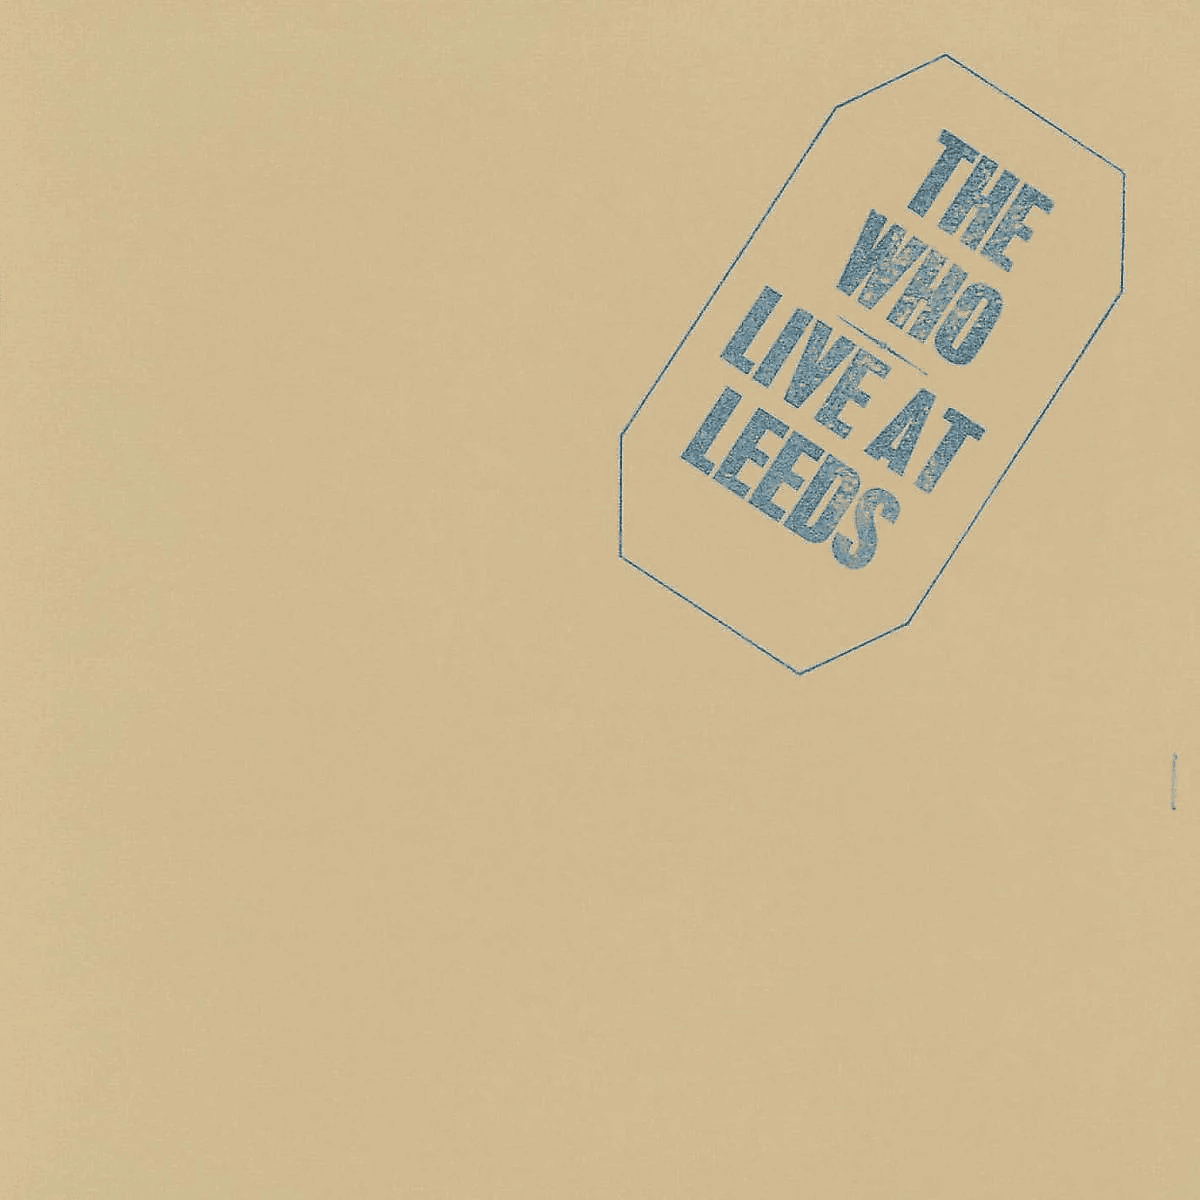 THE WHO - Live at Leeds Vinyl THE WHO - Live at Leeds Vinyl 